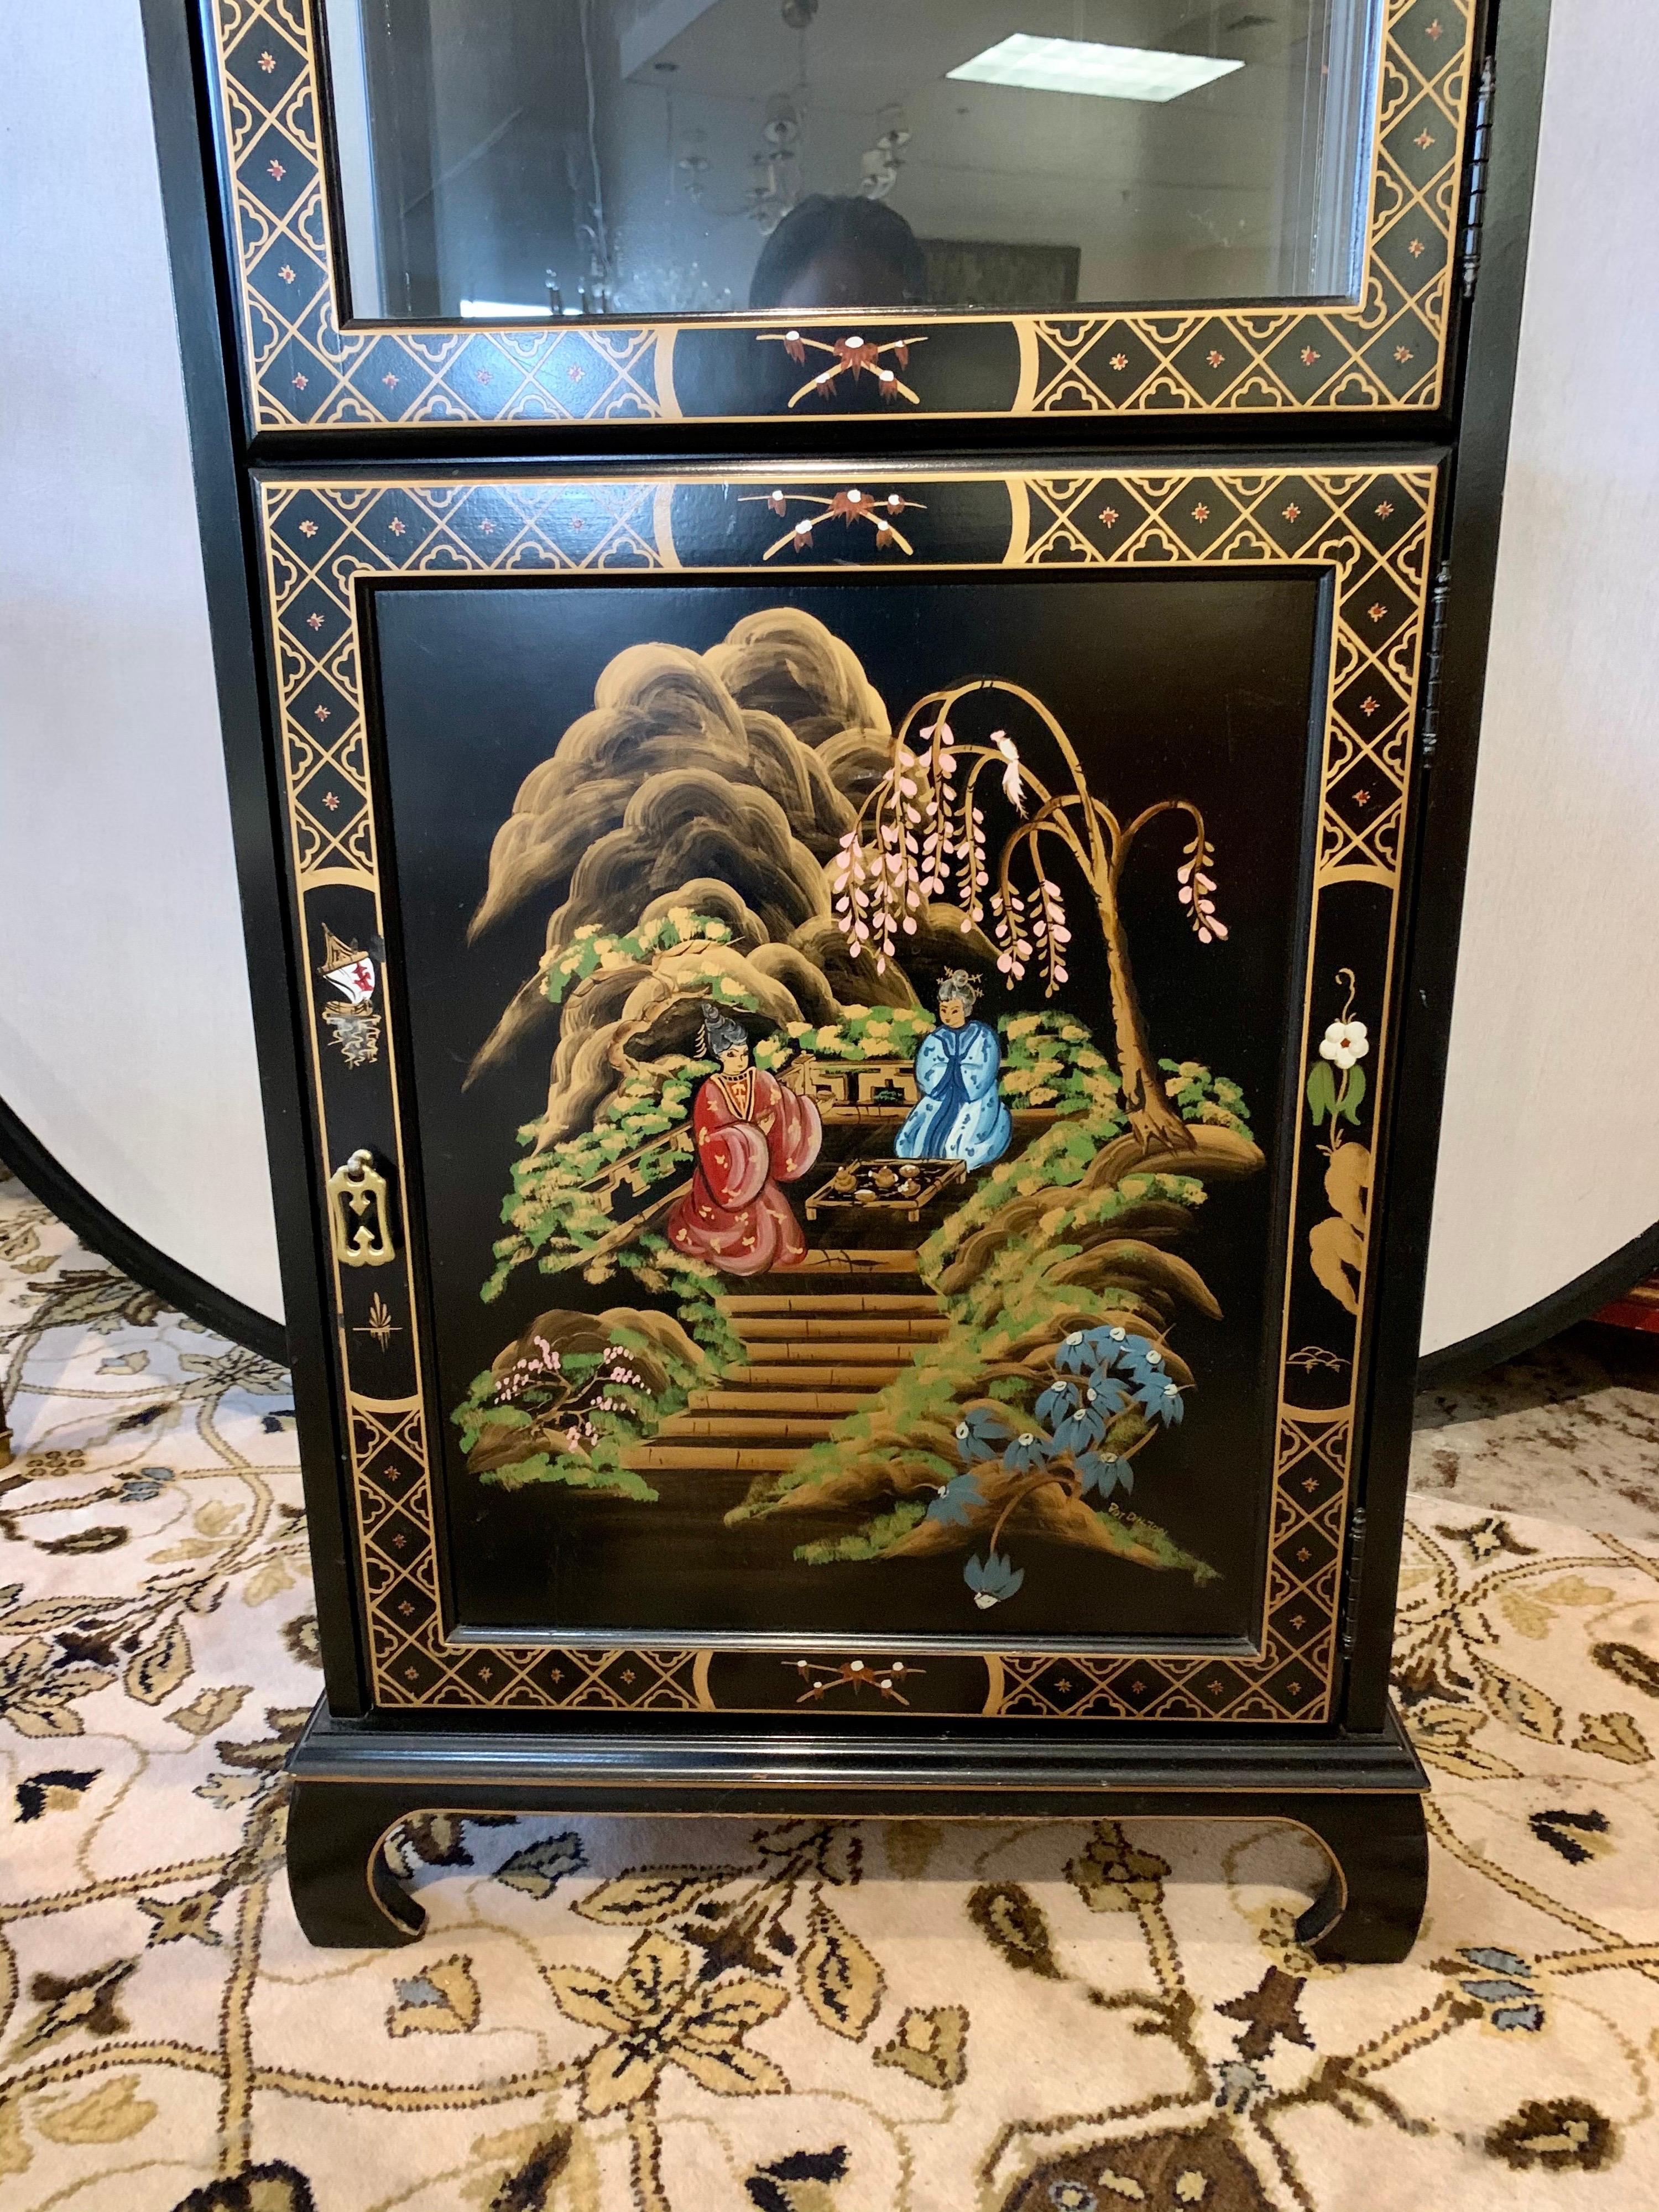 Vintage black lacquer chinoiserie vitrine display cabinet with beautiful hand painted scenery on three sides. It has glass on the top front doors and sides. The front doors open to glass shelves which are illuminated from above. The bottom portion